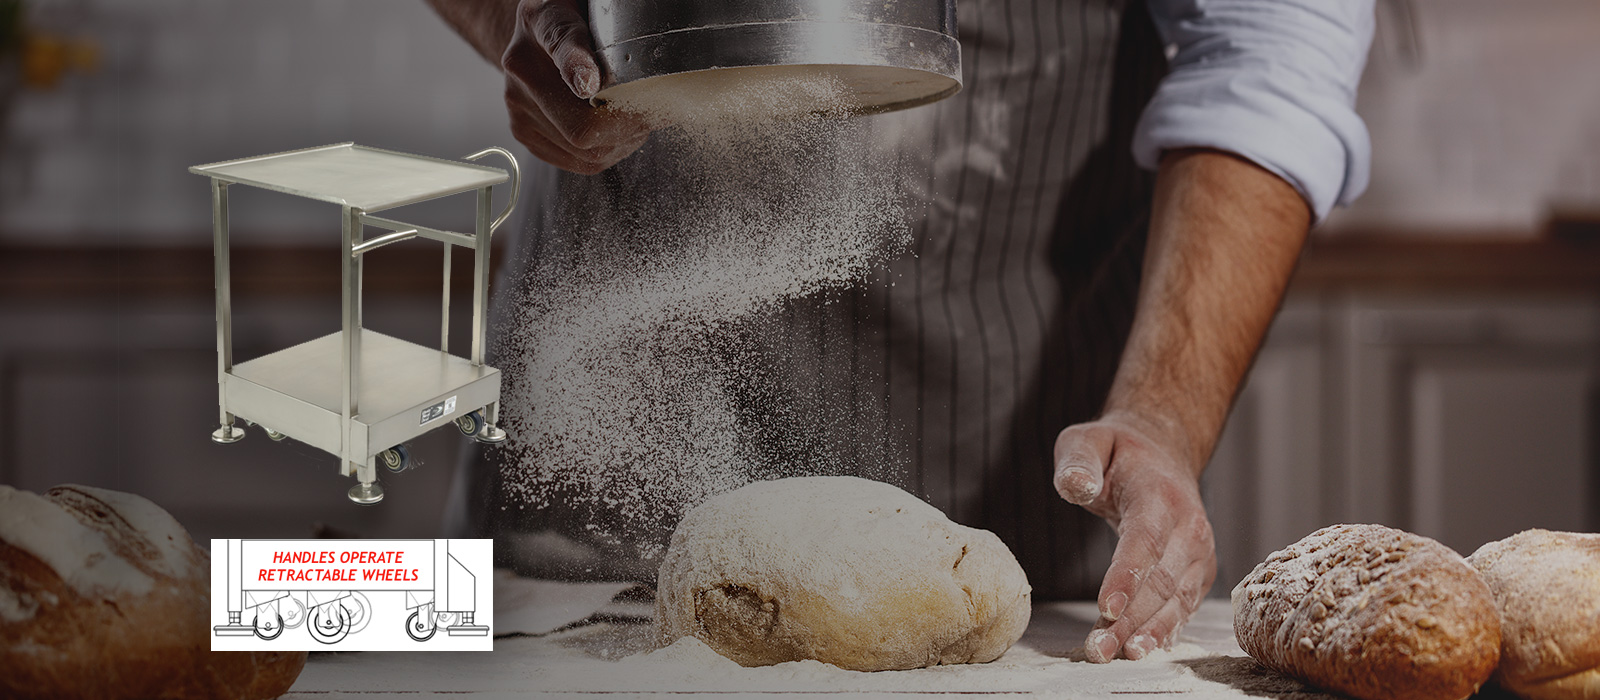 Slider background image with bread slicer table. Man making bread in background.